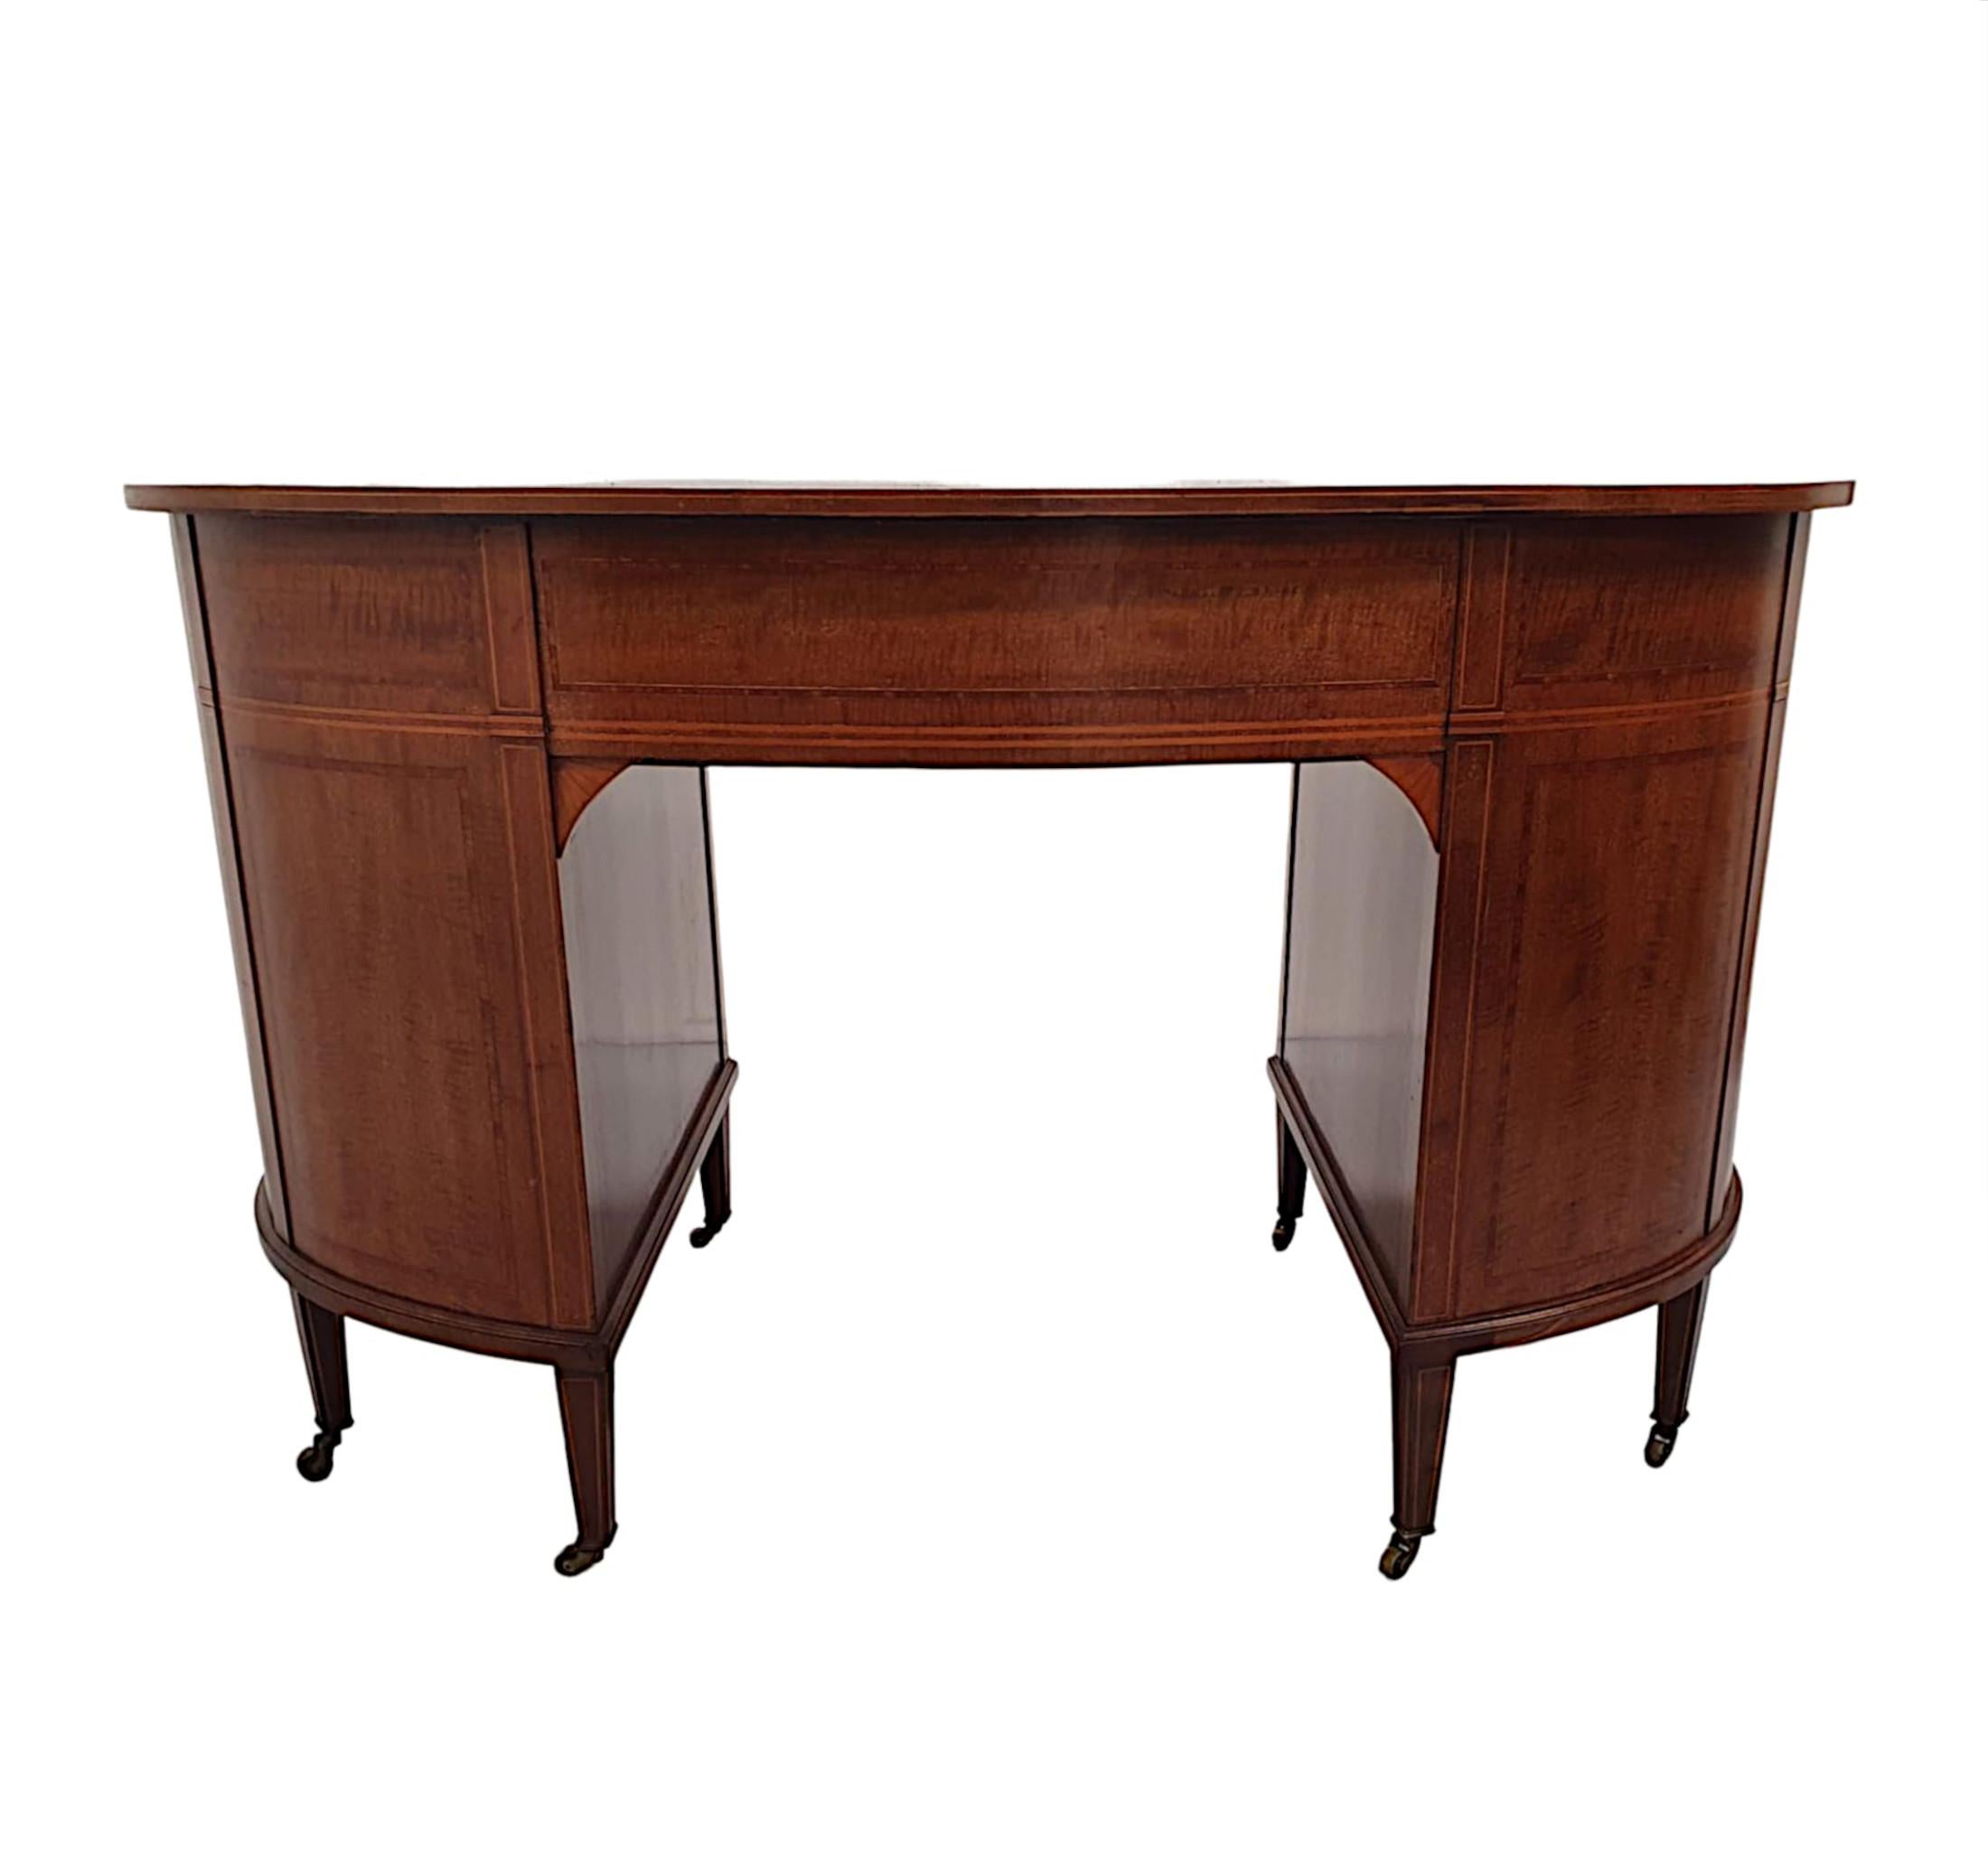  A Very Fine Edwardian Leather Top Kidney Shaped Desk In Good Condition For Sale In Dublin, IE